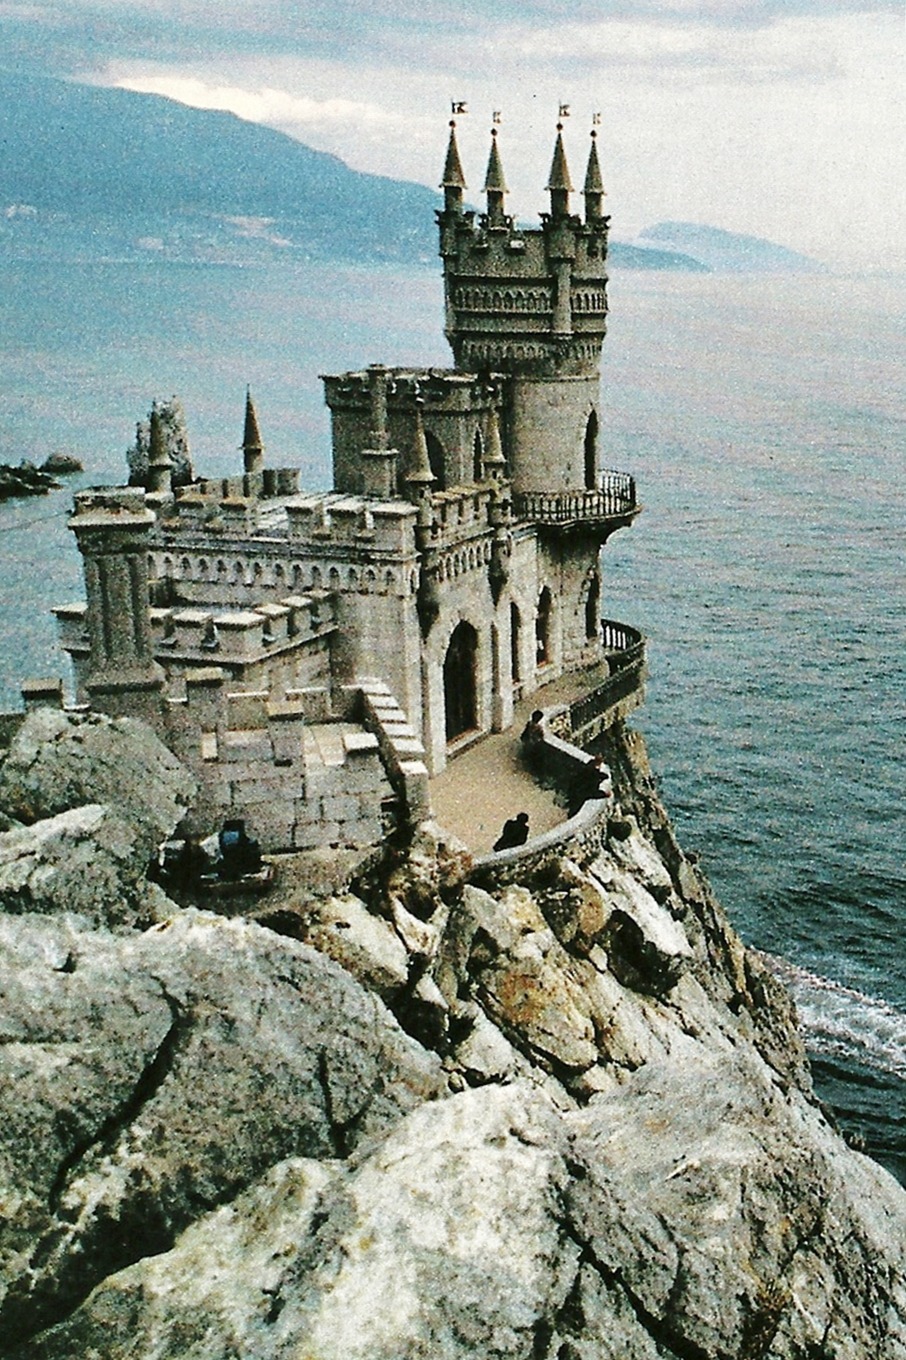 Neo-gothic castle on the Black Sea in Ukraine
National Geographic | May 1987